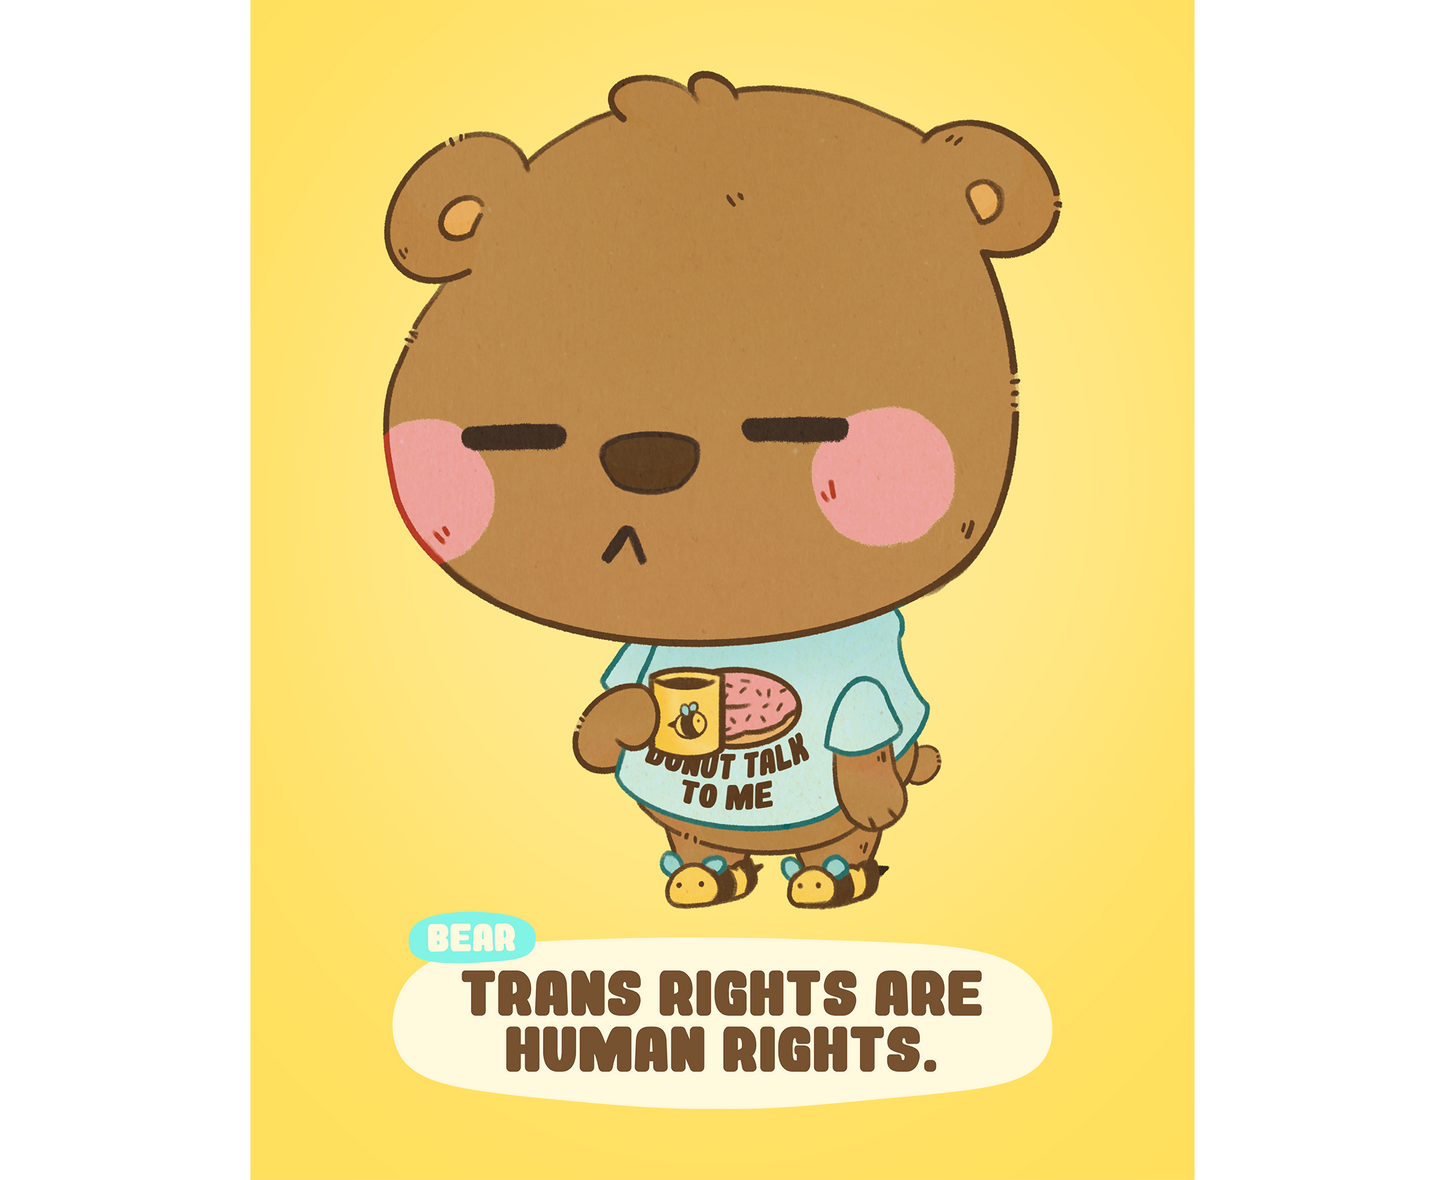 "Trans Rights are Human Rights" 8 x 10 inch Art Print.